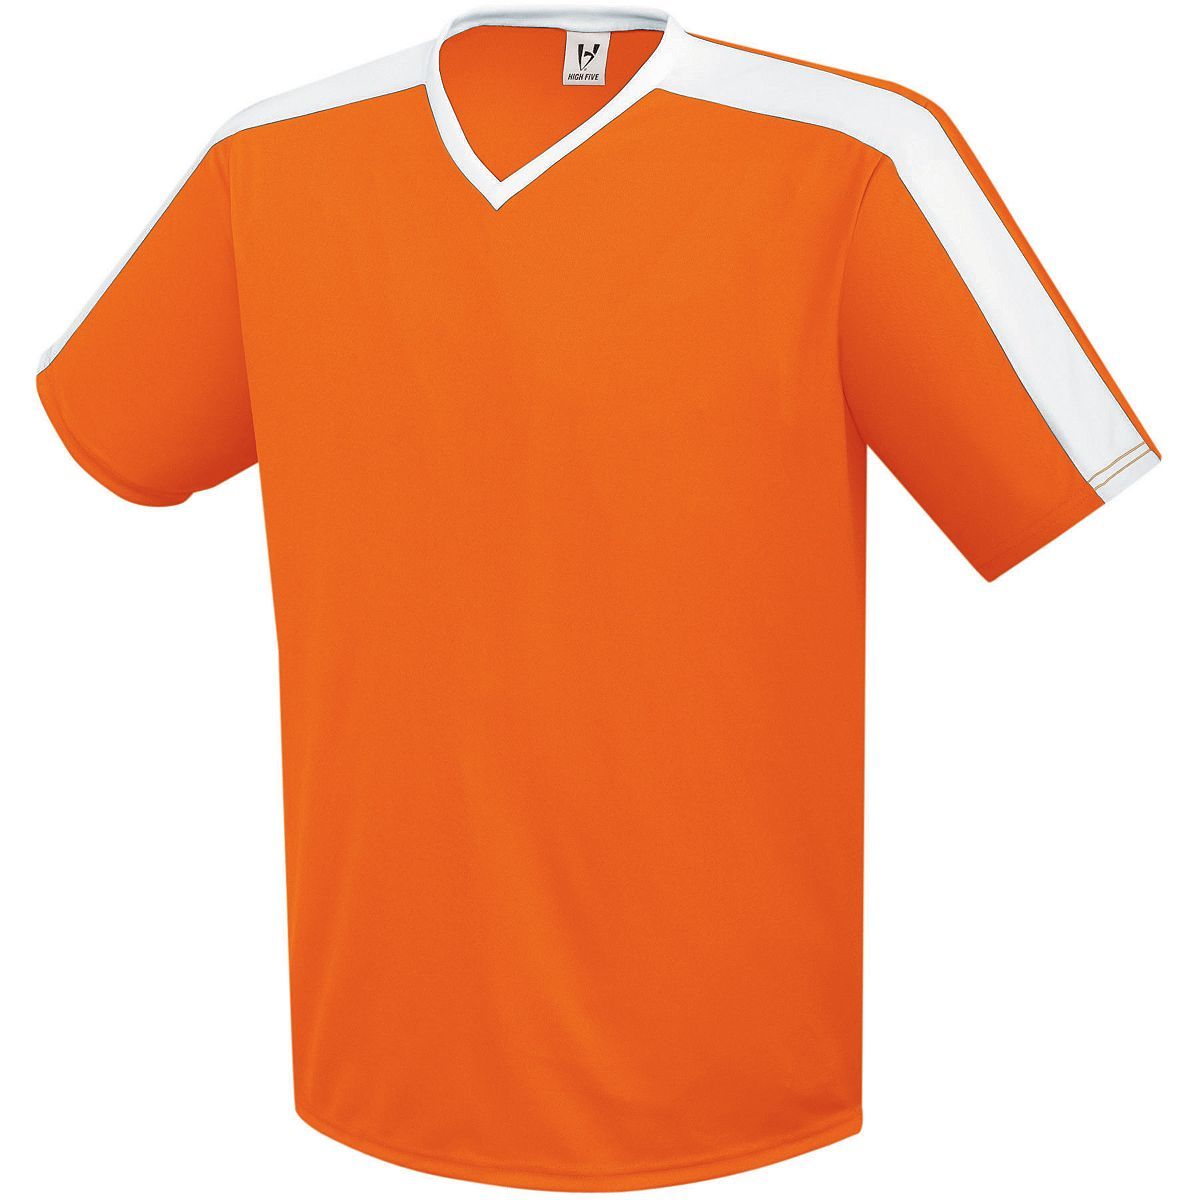 High 5 Genesis Soccer Jersey in Orange/White  -Part of the Adult, Adult-Jersey, High5-Products, Soccer, Shirts, All-Sports-1 product lines at KanaleyCreations.com